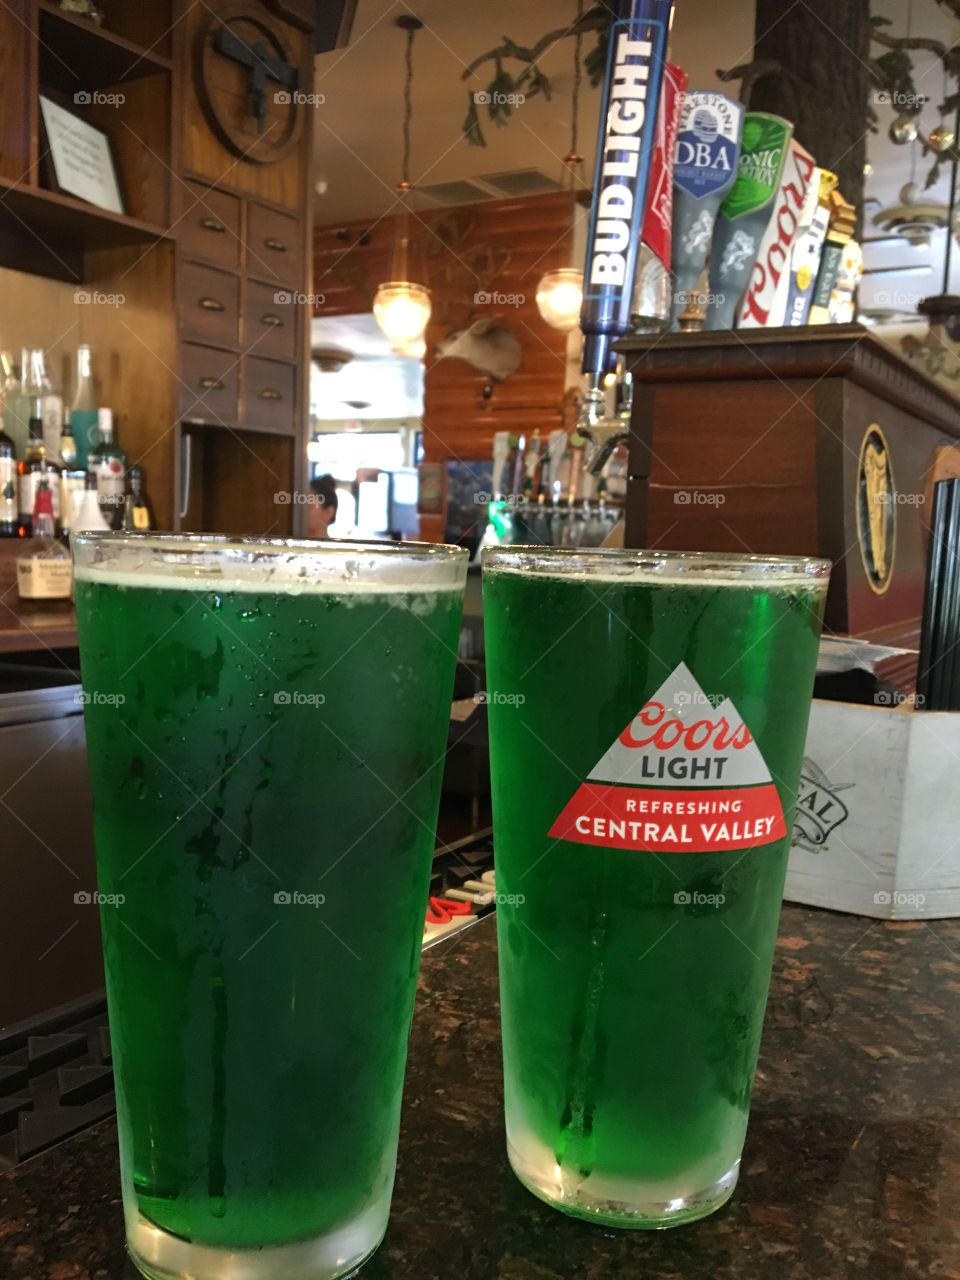 St patty’s day! Green beer taste better!